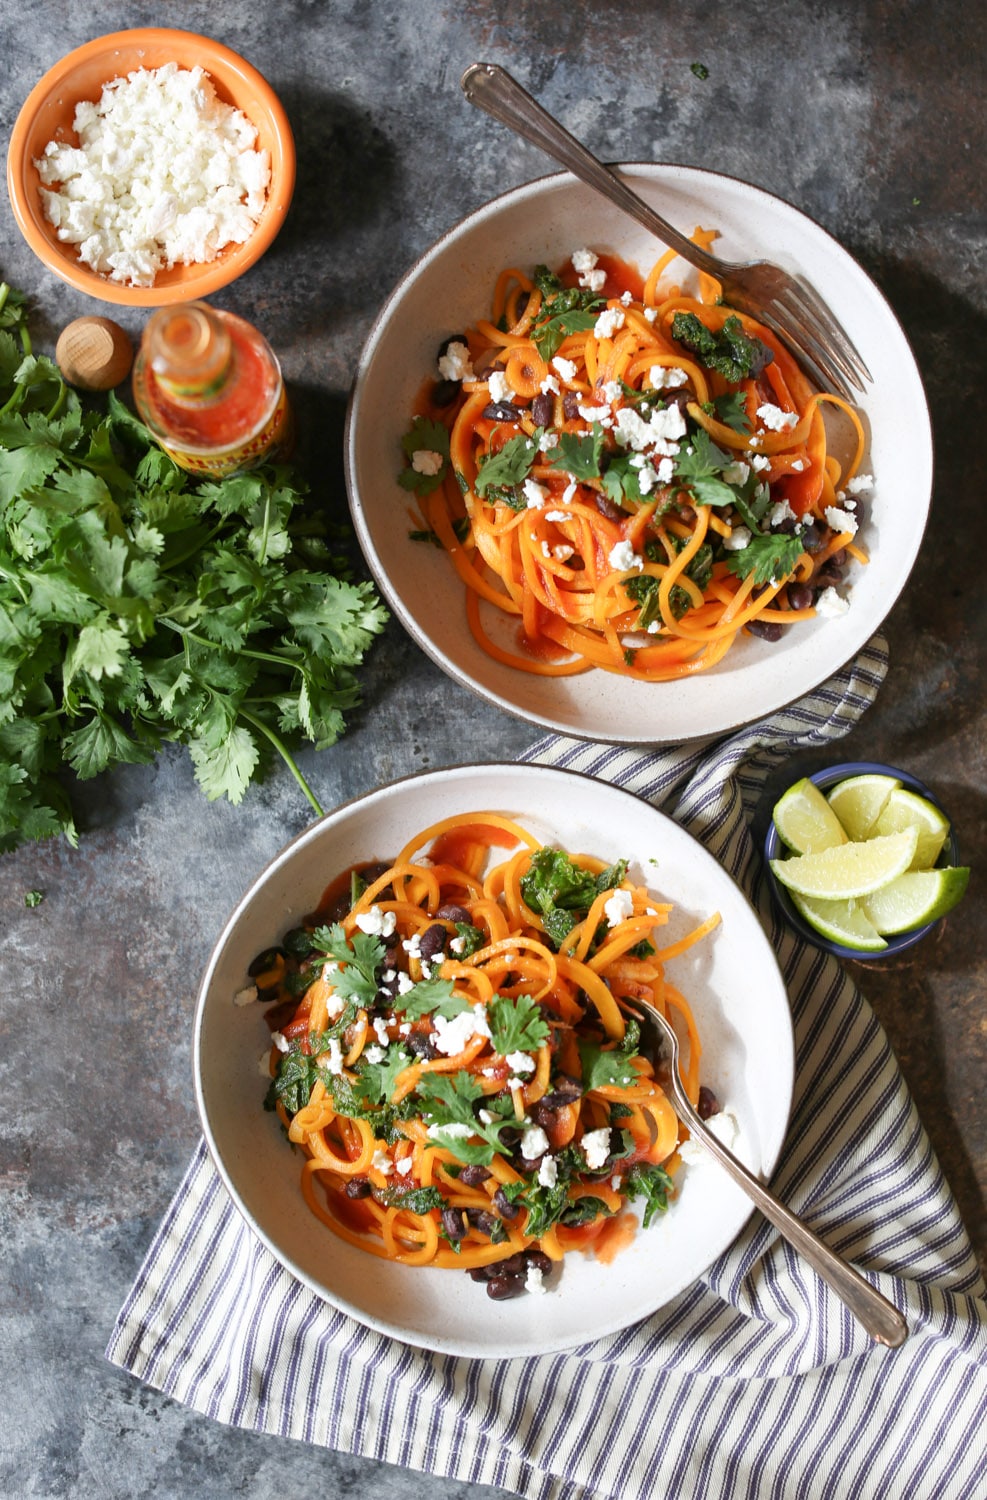 20 Satisfying Vegetarian Recipes- Butternut Squash Noodle Enchilada Bowls with Black Beans and Kale